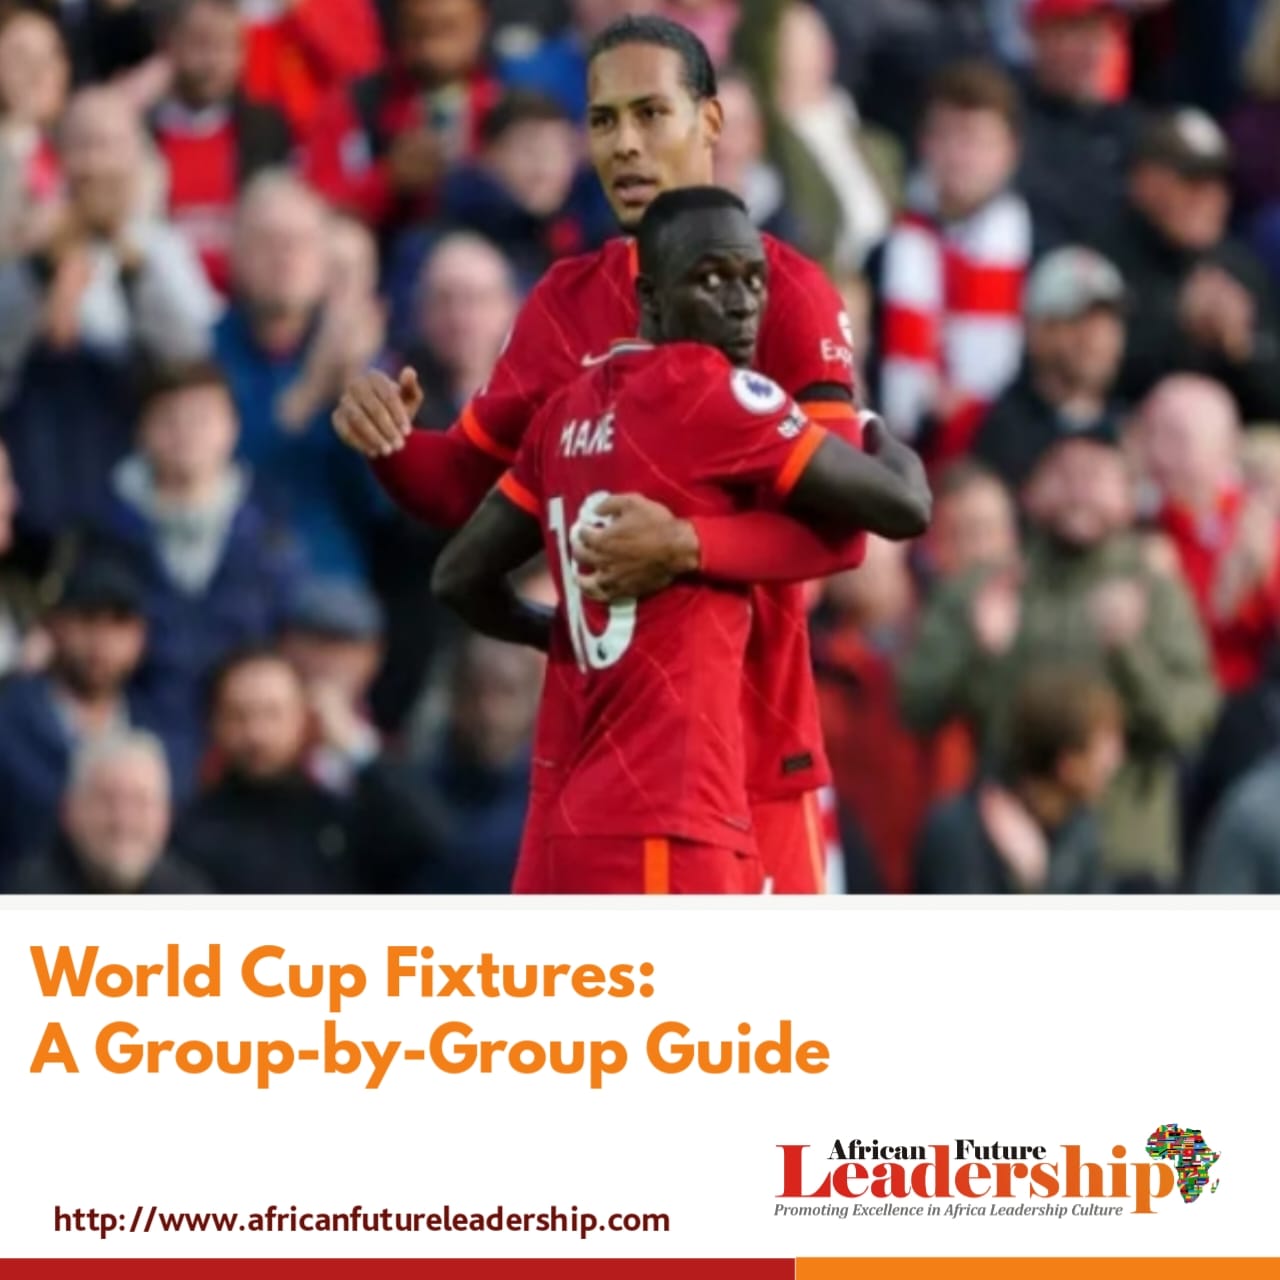 World Cup Fixtures: A Group-by-Group Guide